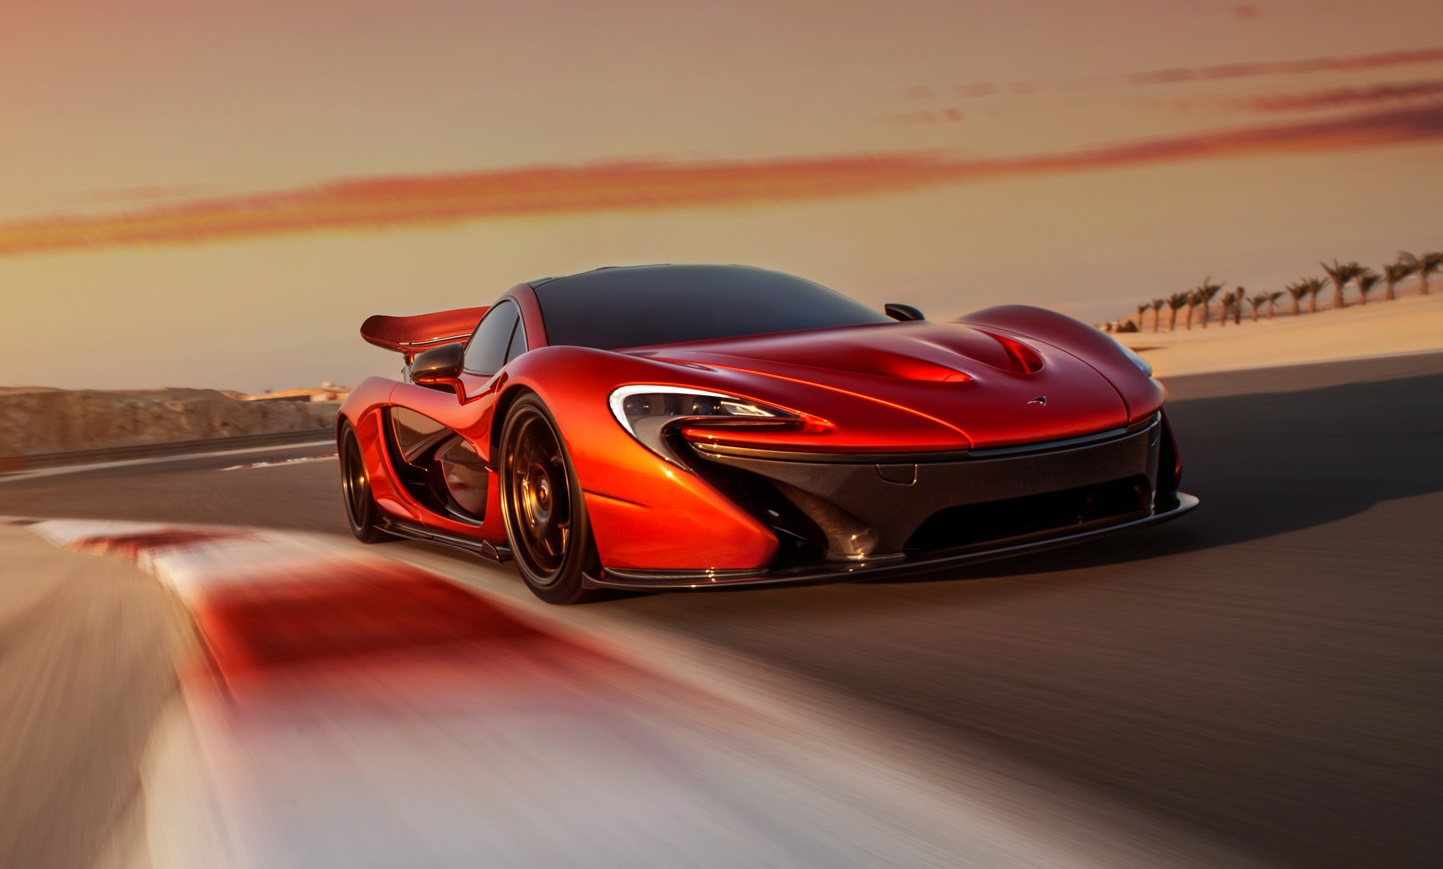 New McLaren P1 High Res Images Released - ForceGT.com